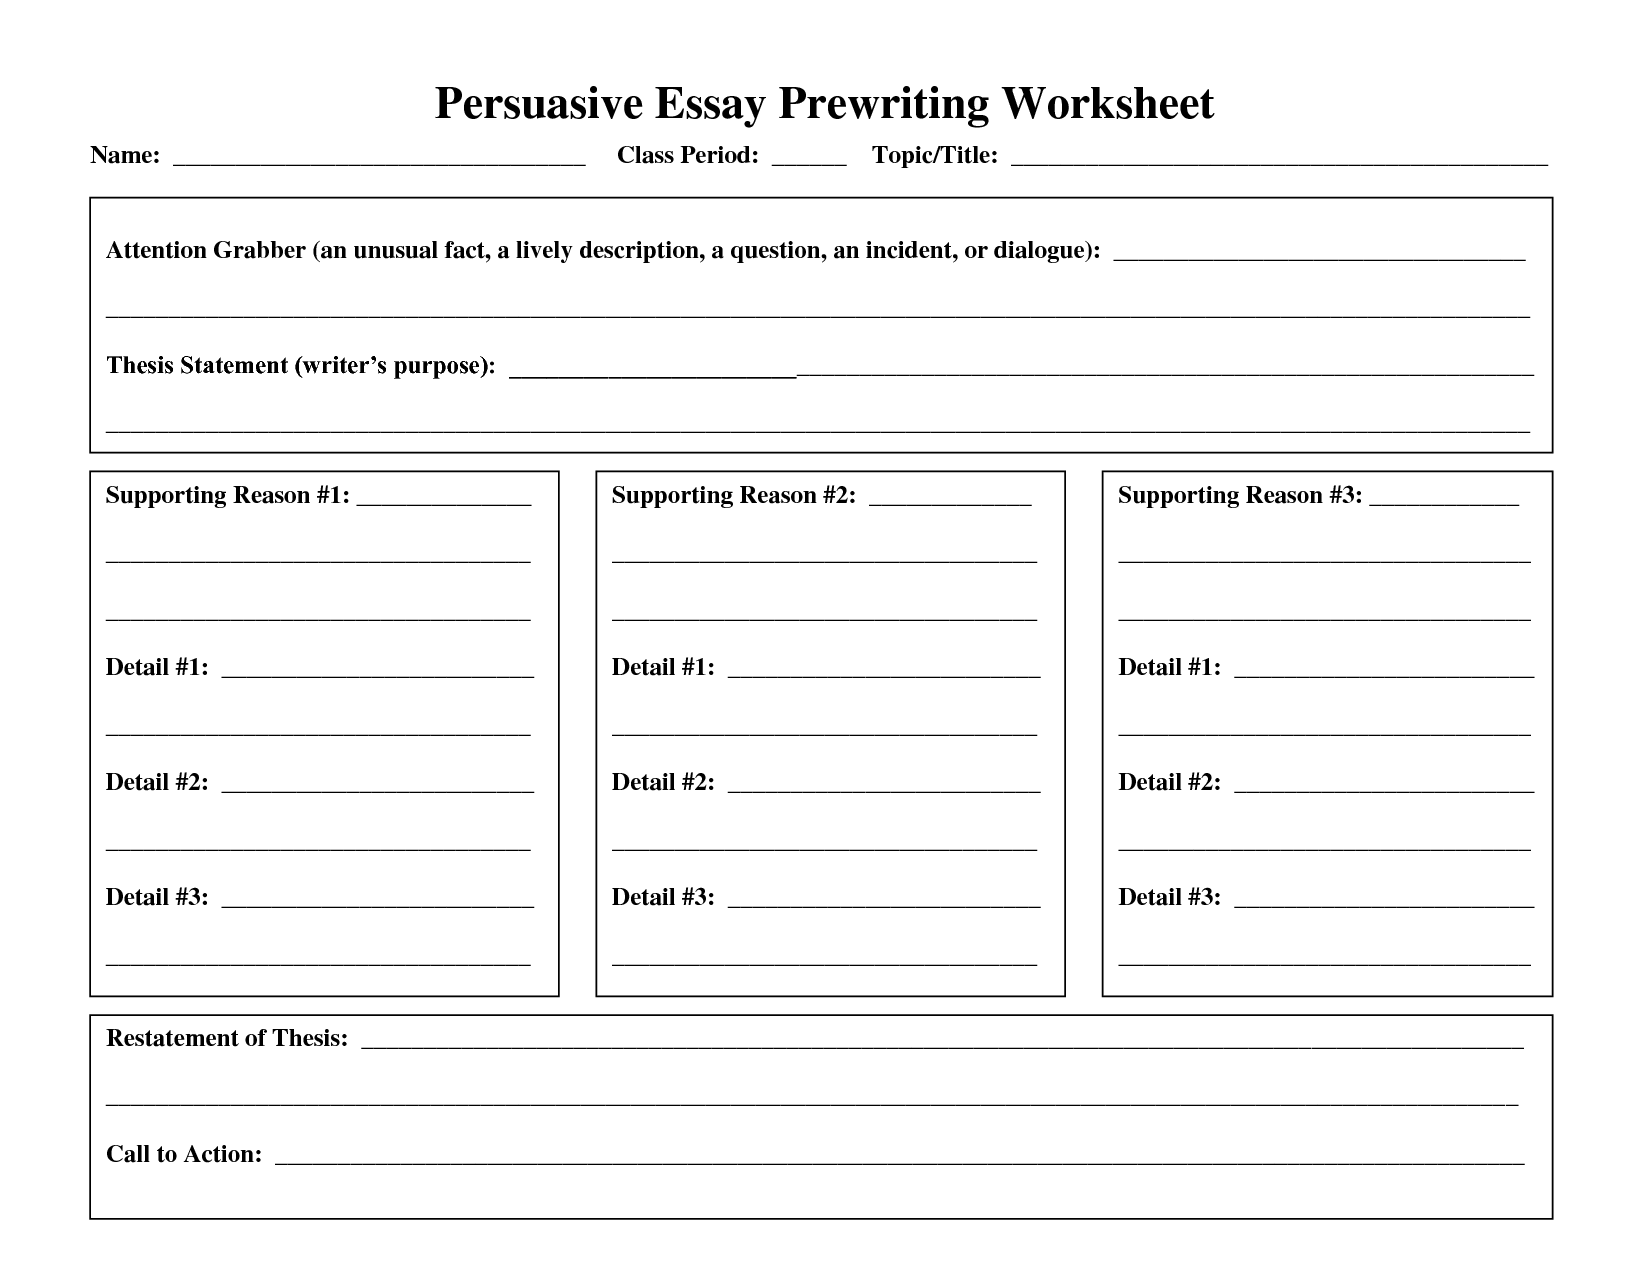 20 Best Images of Essay Organizer Worksheets - Writing Expository Essay